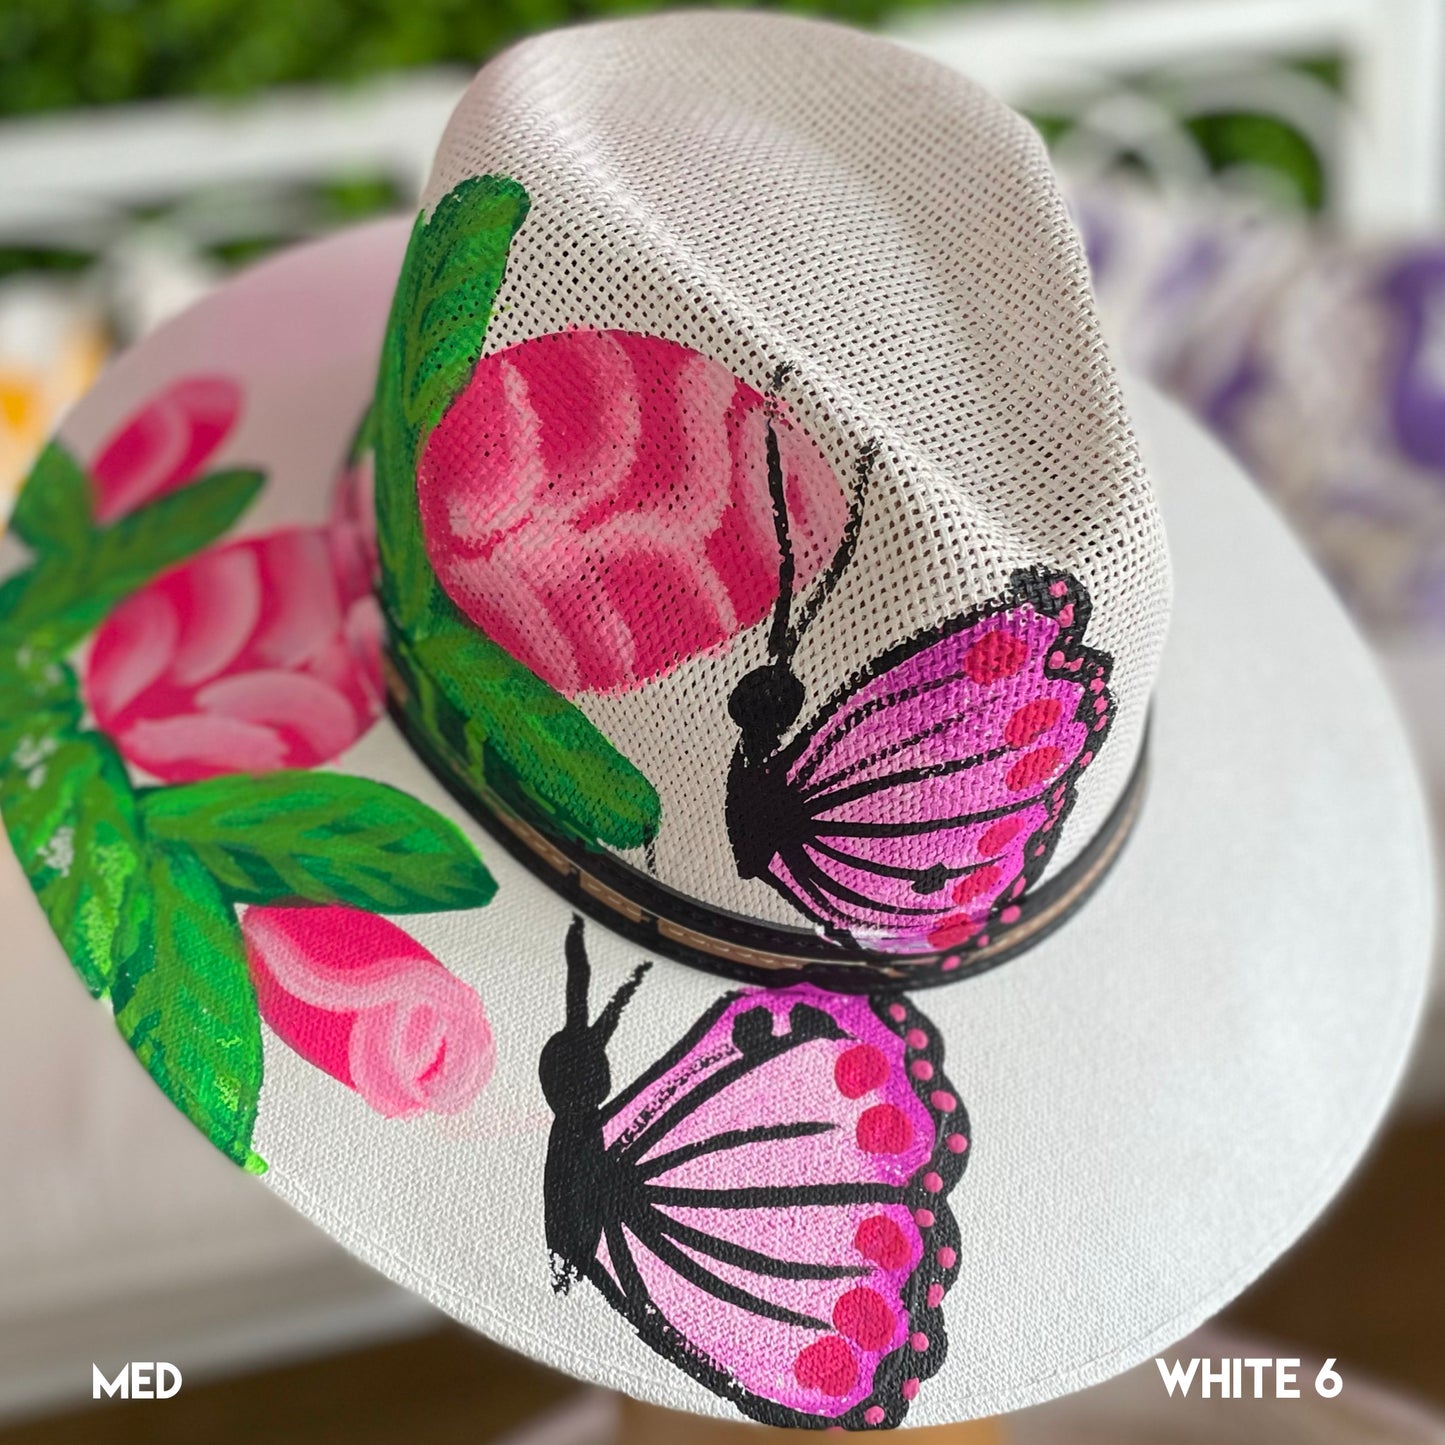 Mexican Hand Painted Sun Hat